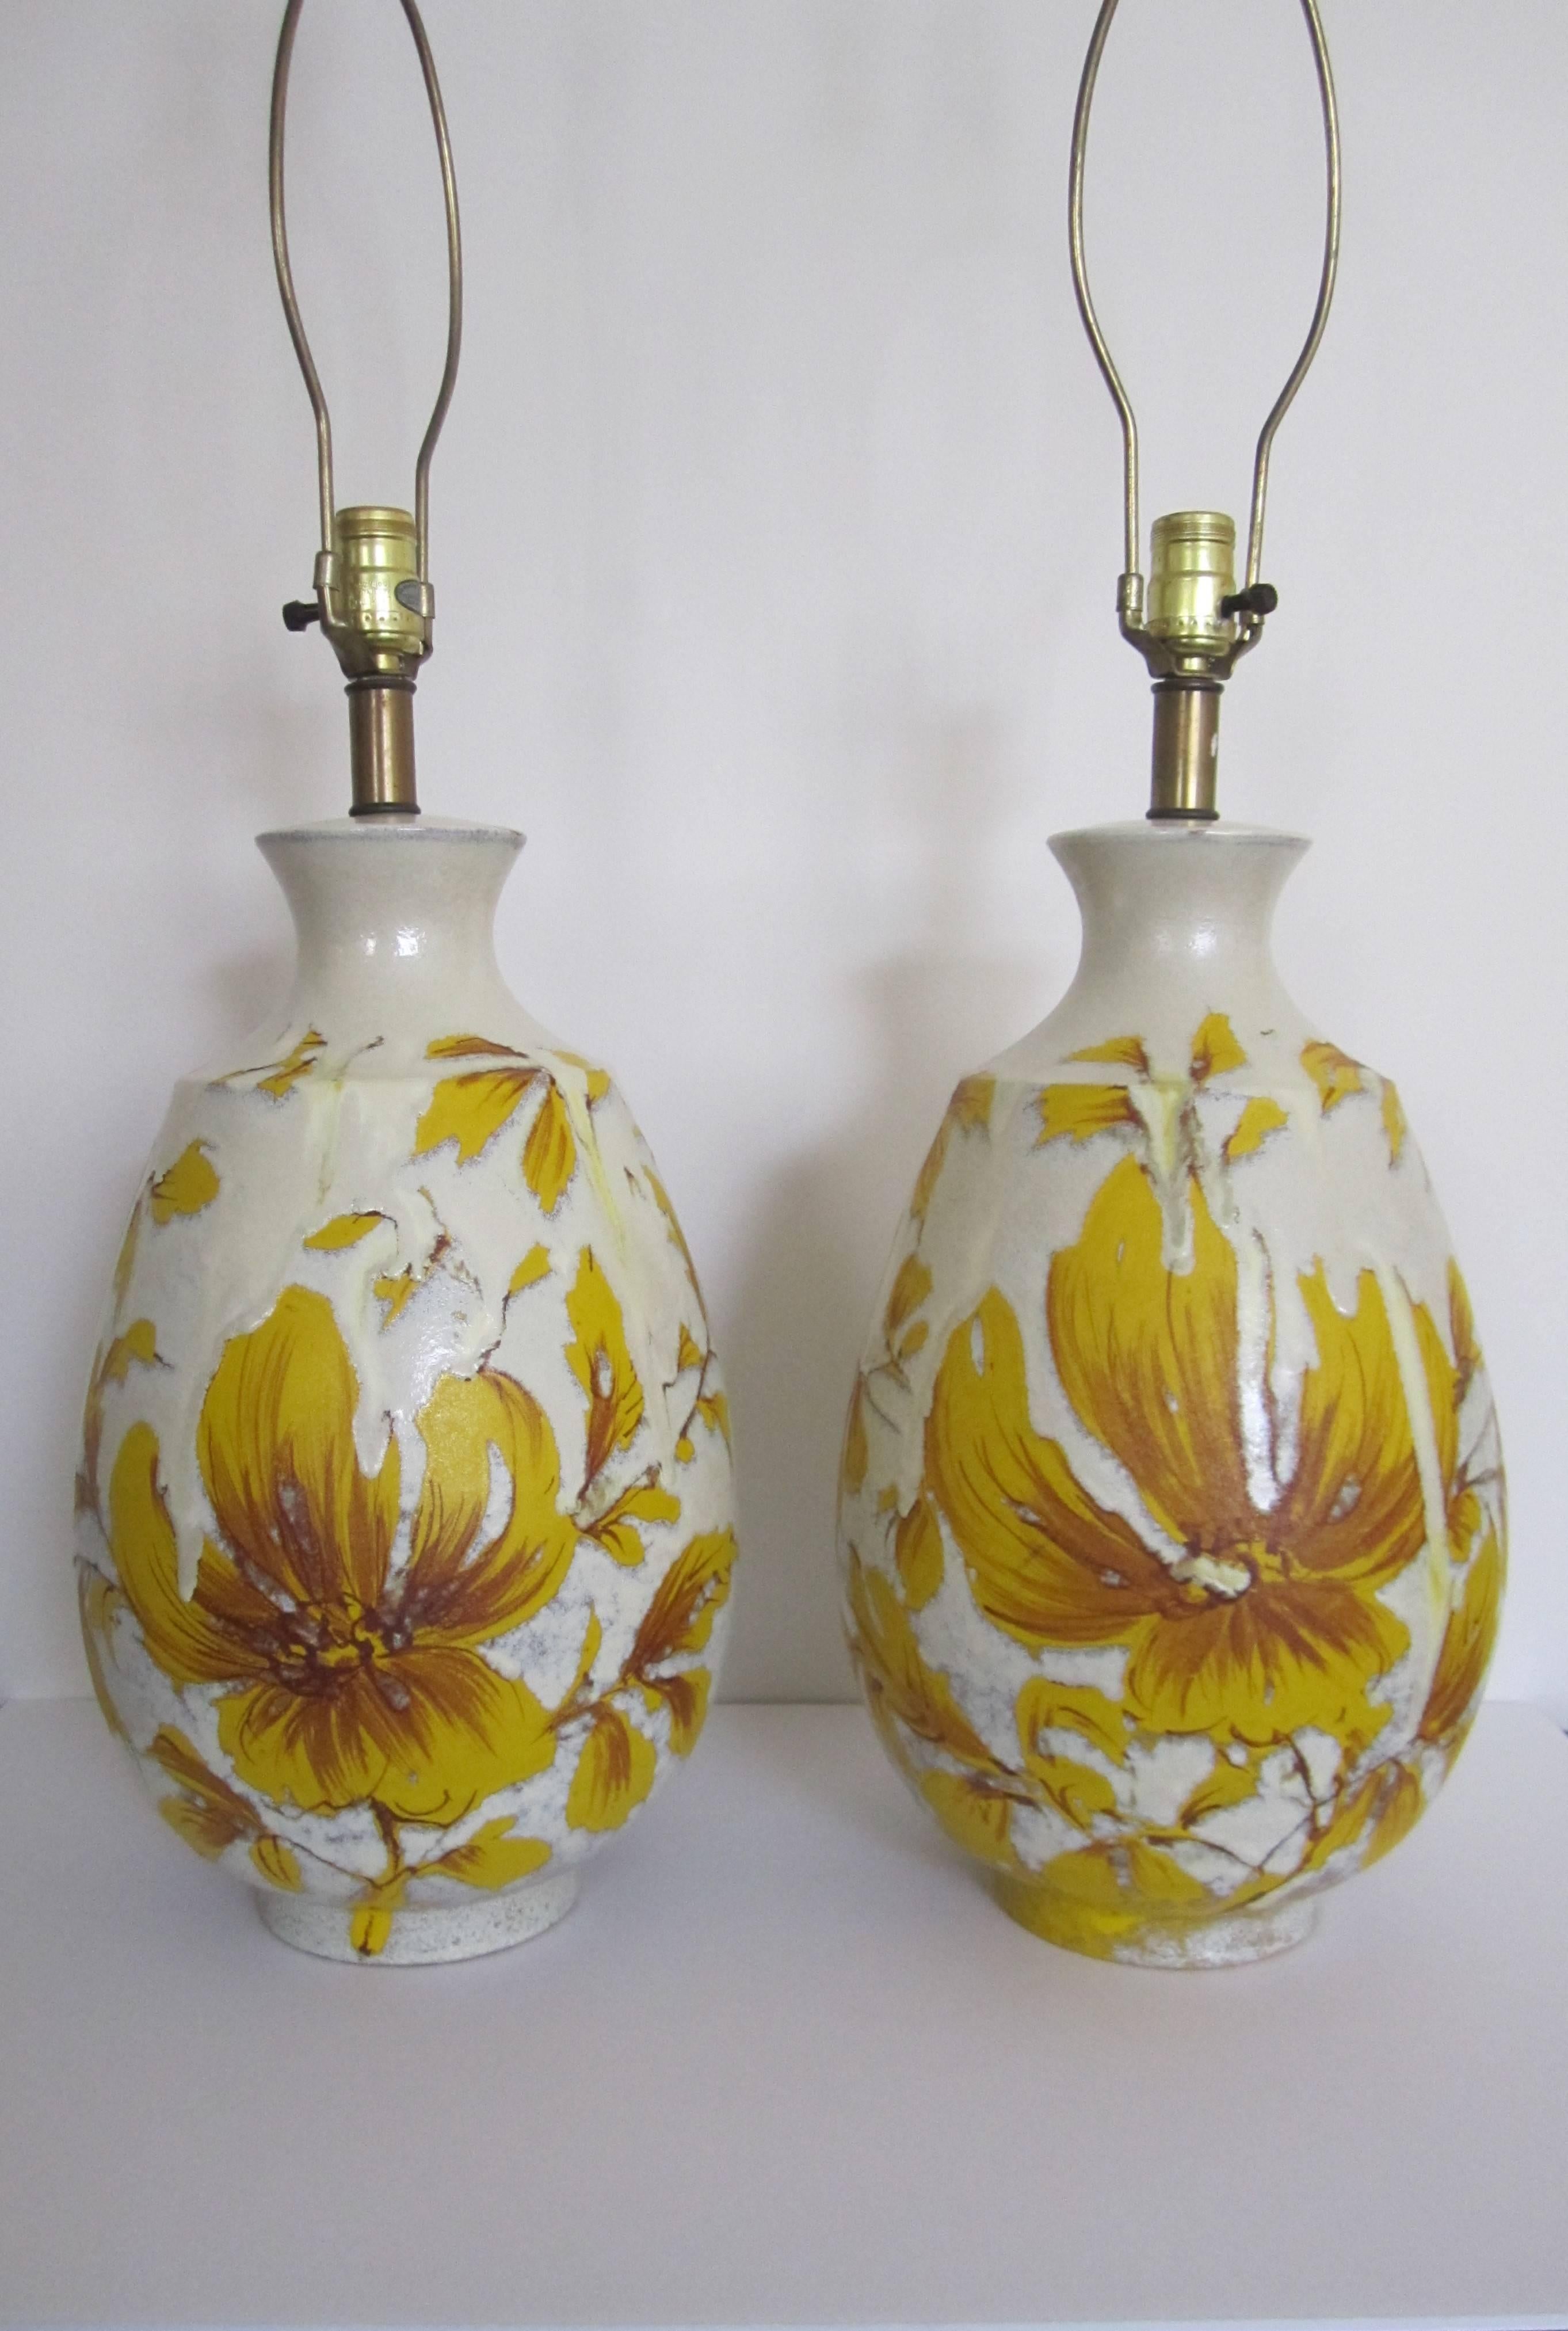 A stunning pair of relatively large yellow and white terracotta pottery table lamps, circa mid-20th century, 1960s. Lamps have large floral motif on front and smaller flowerets on side and back, finished with a textured surface. Colors include